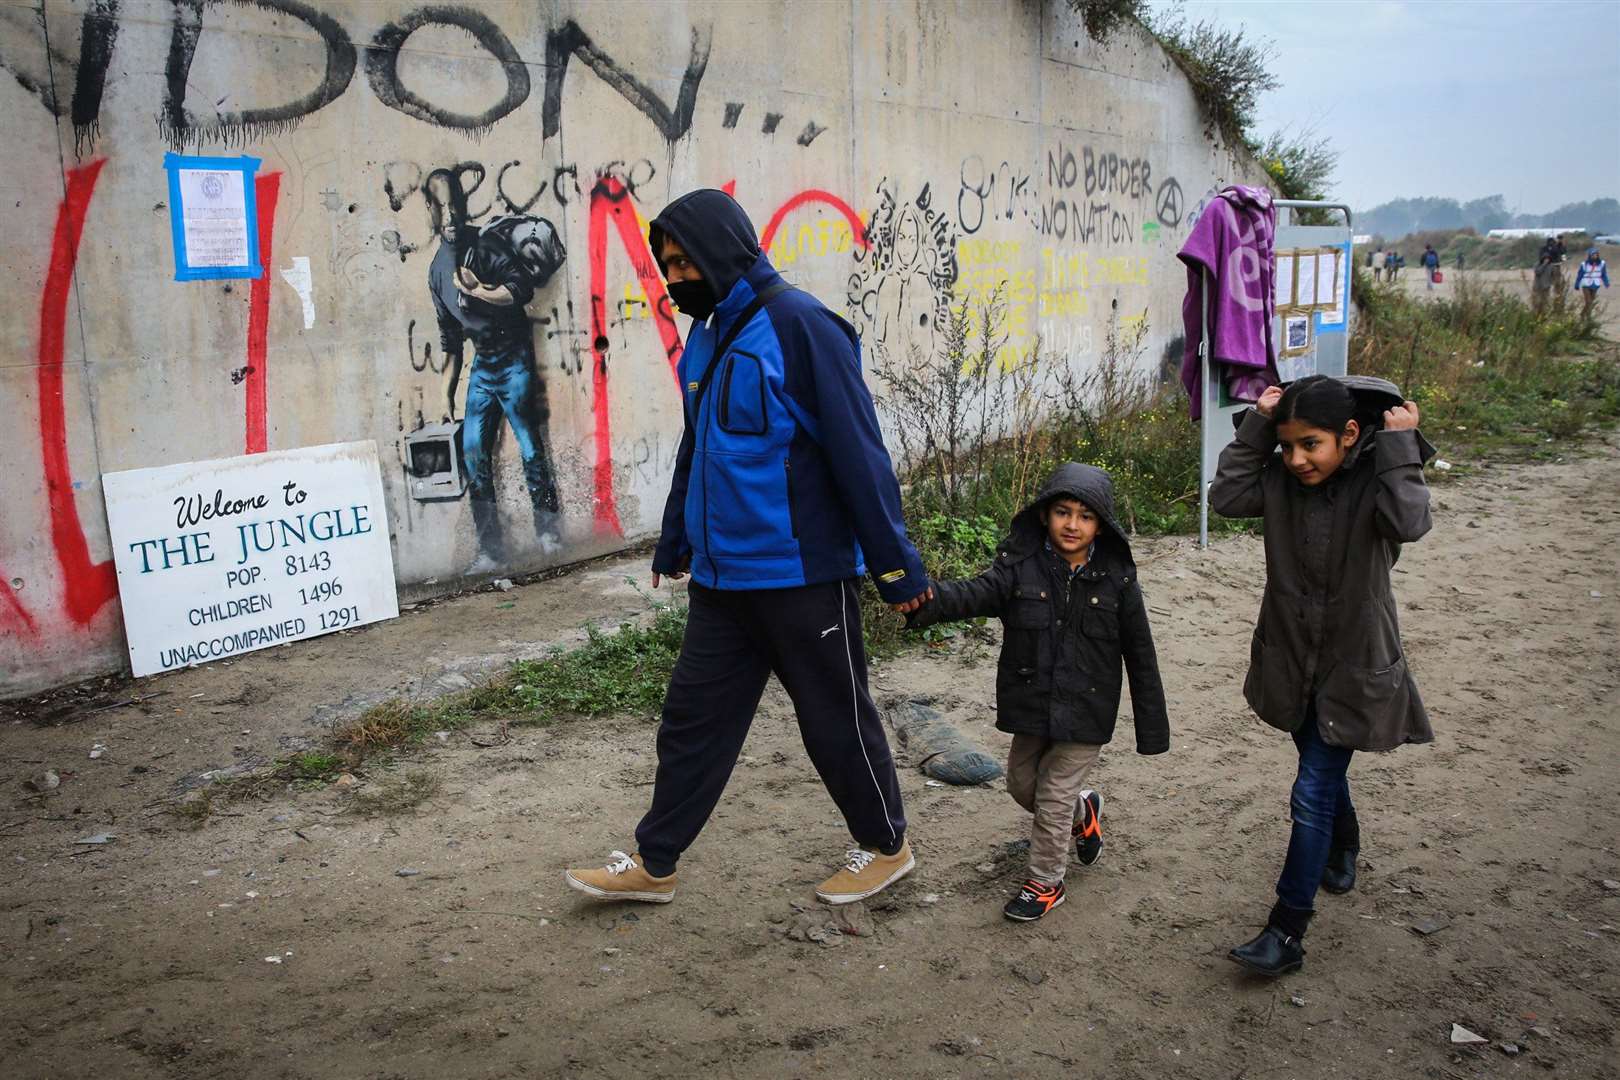 Refugees were made to leave the Jungle in Calais when it closed in 2016. Picture copyright SWNS (South West News Service).